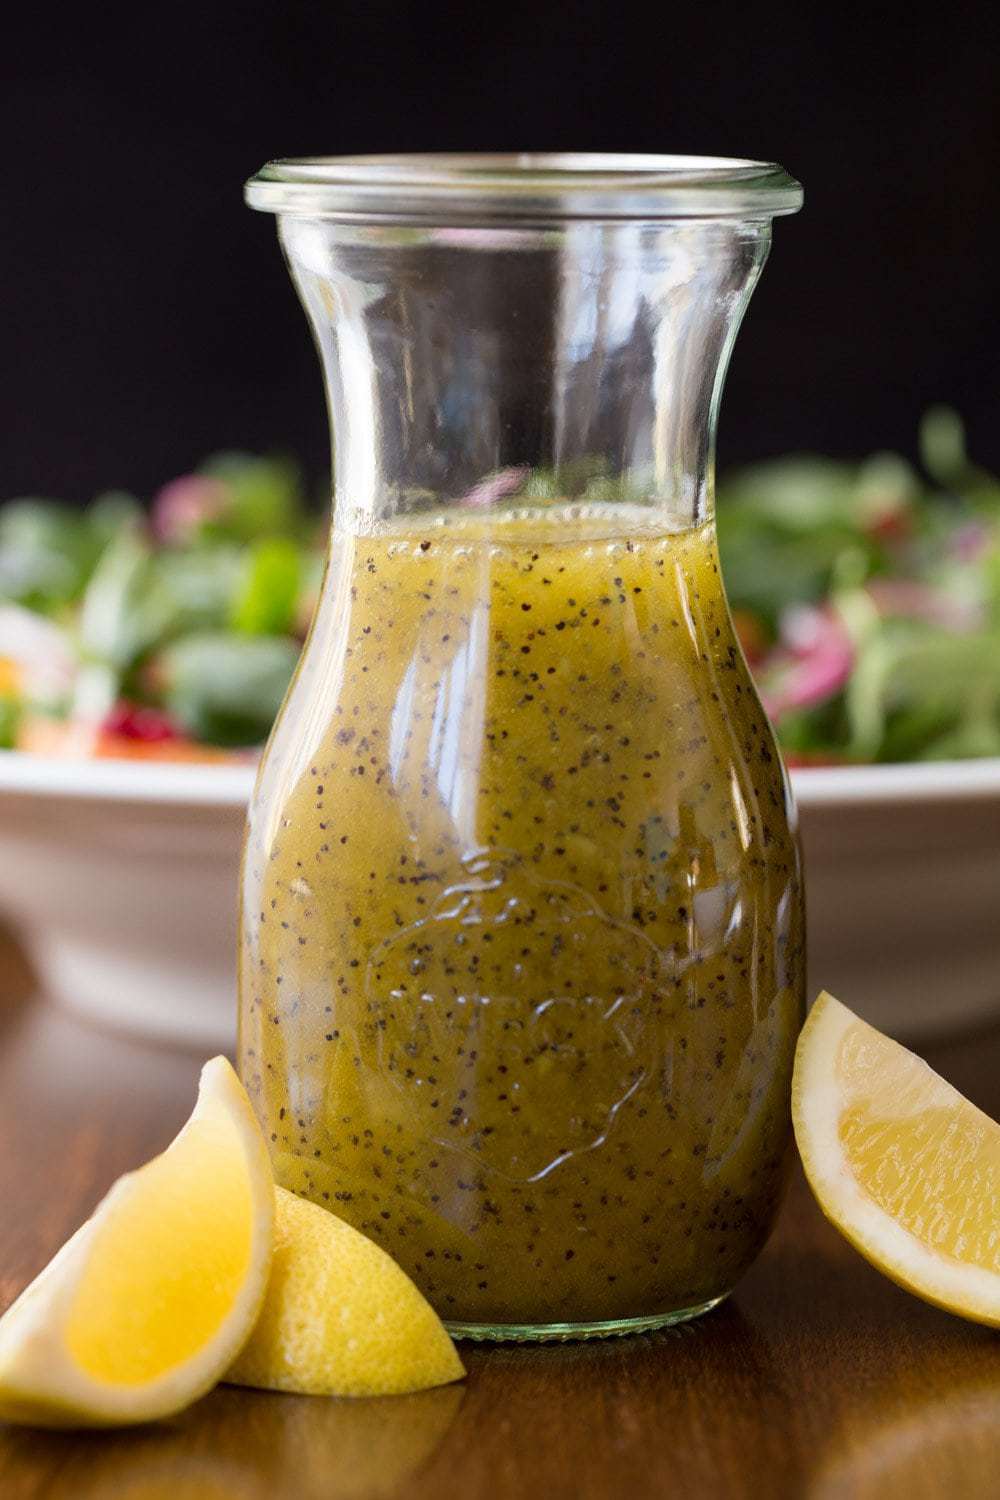 Vertical photo of Lemon Ginger Salad Dressing in a glass jar surrounded by fresh lemons and a green salad in the background.